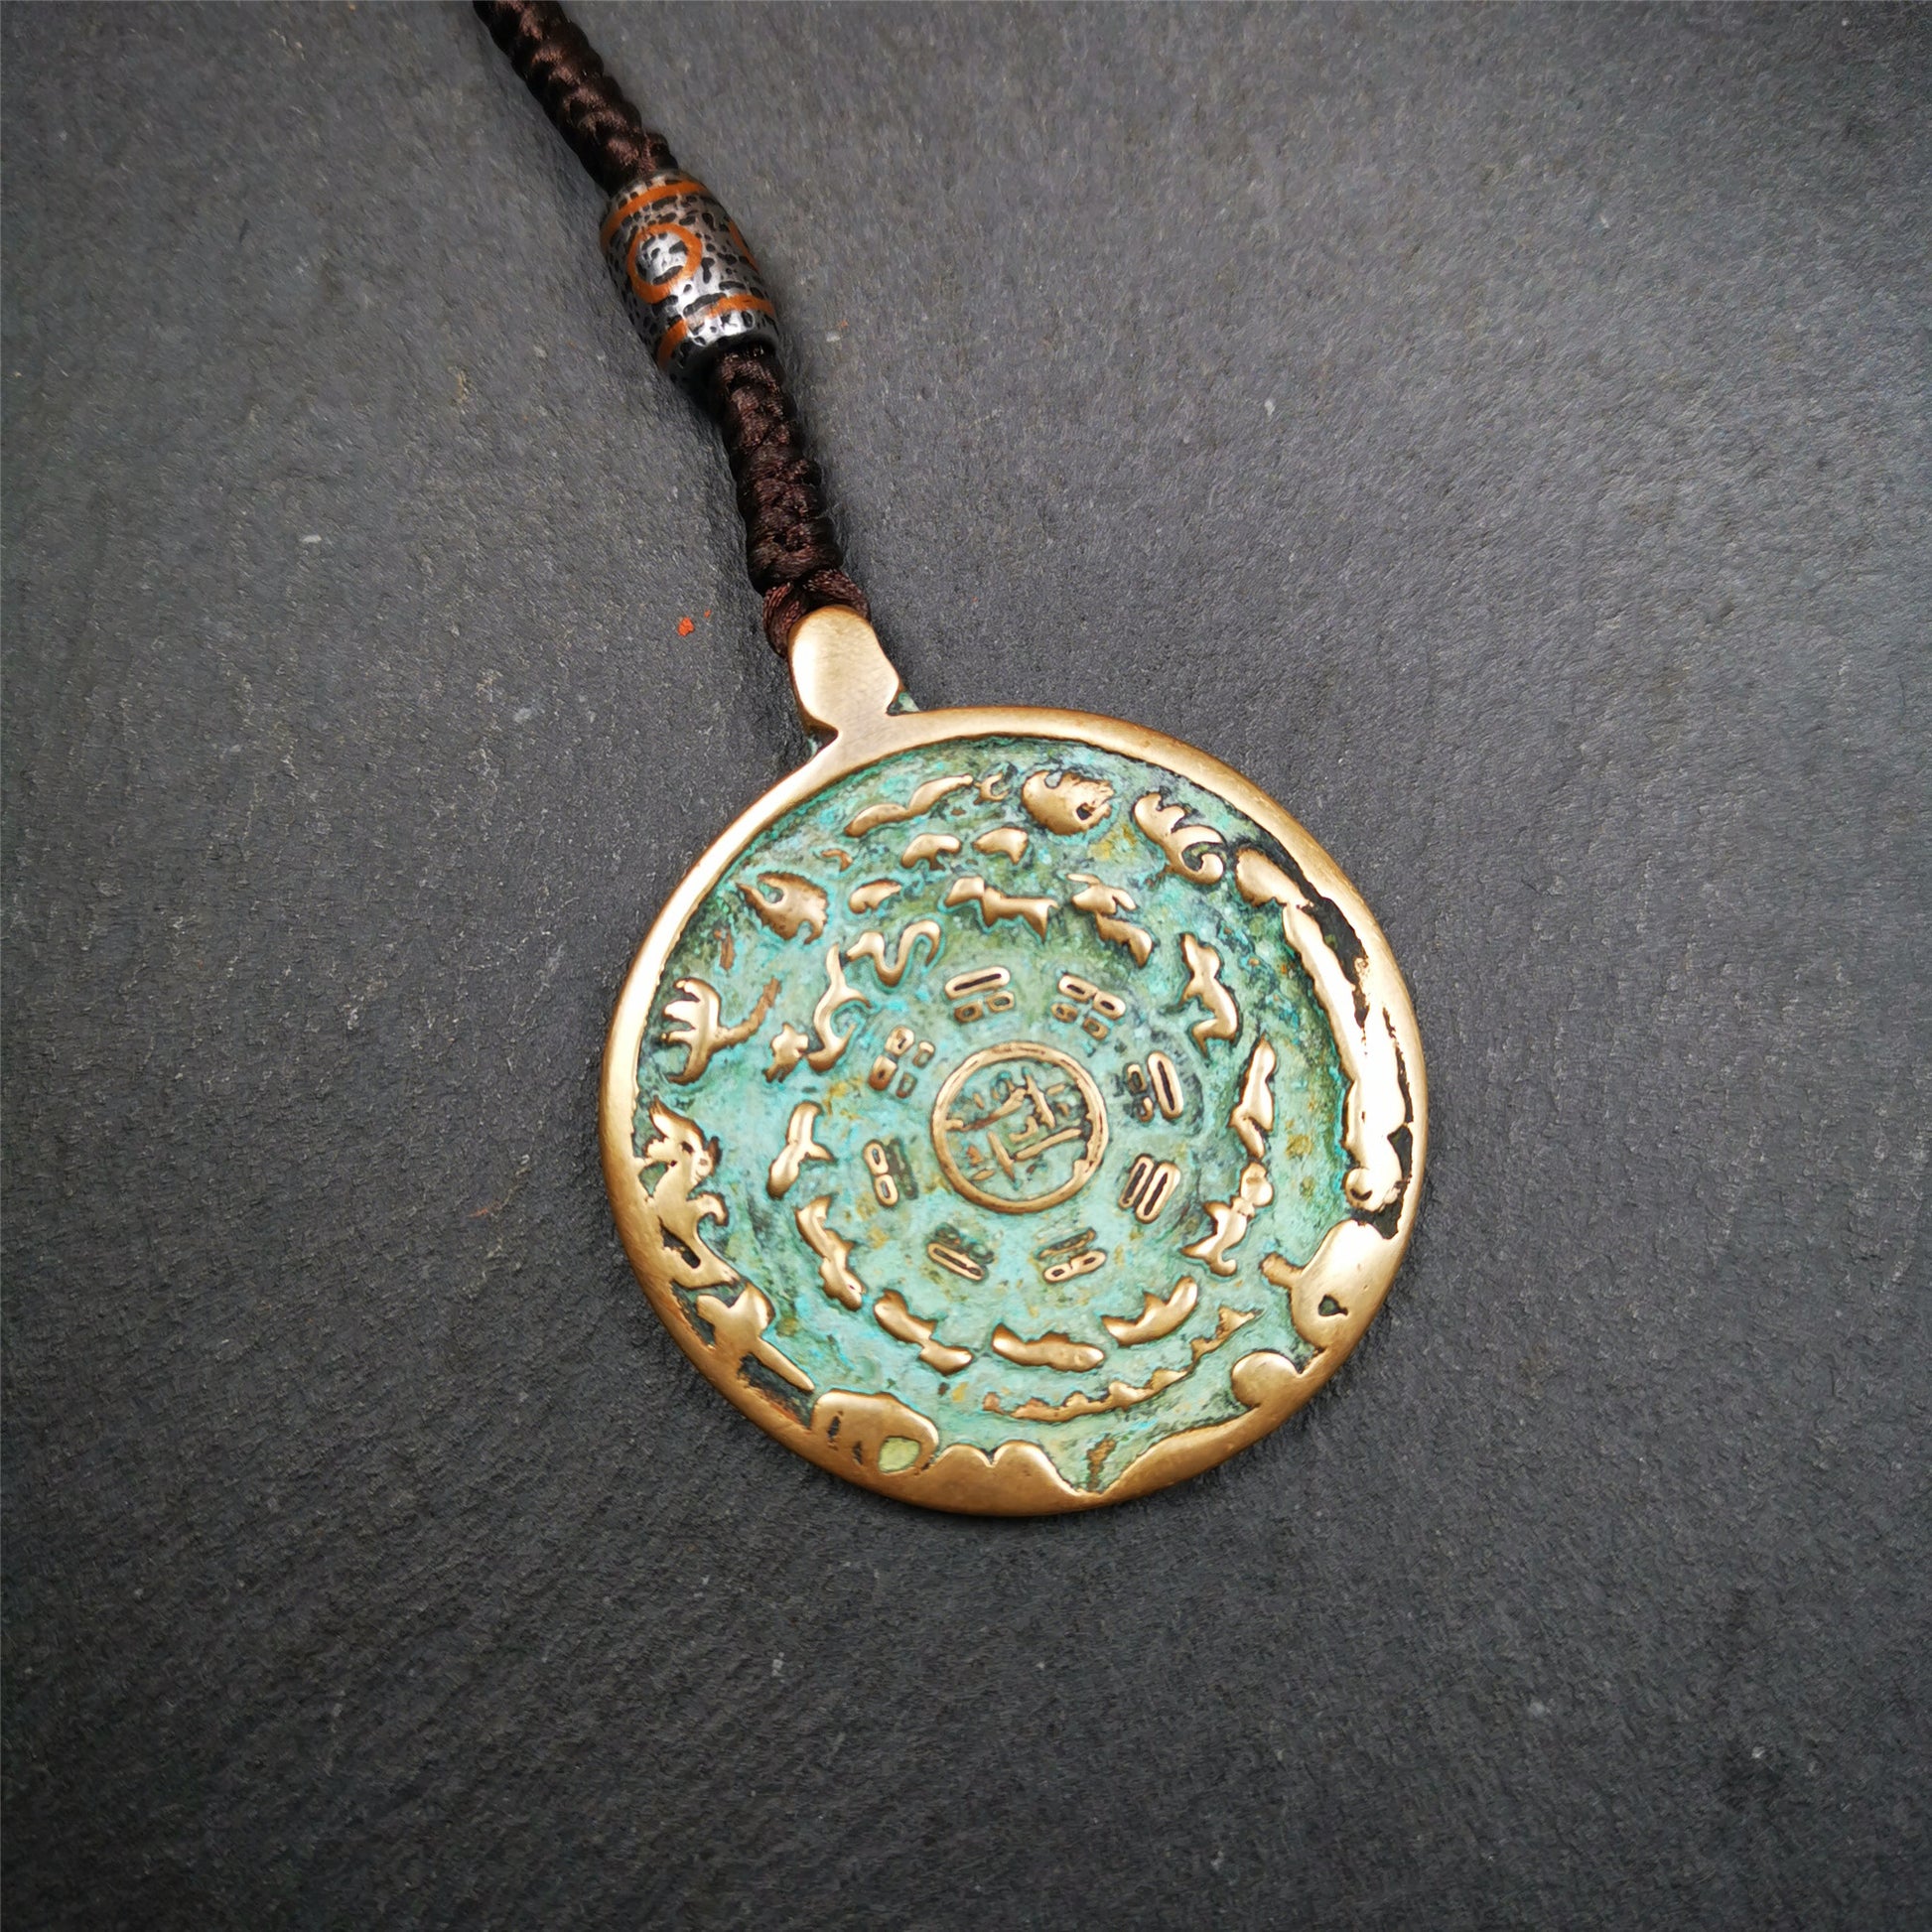 This unique tibetan melong badge was collected from Kathok Monastery,about 50 years old. It's a Astrology Protective Amulet Pendant,made of lima brass. The pattern is Tibetan Budhist Protective Amulet Pendant - SIPAHO(srid pa ho).